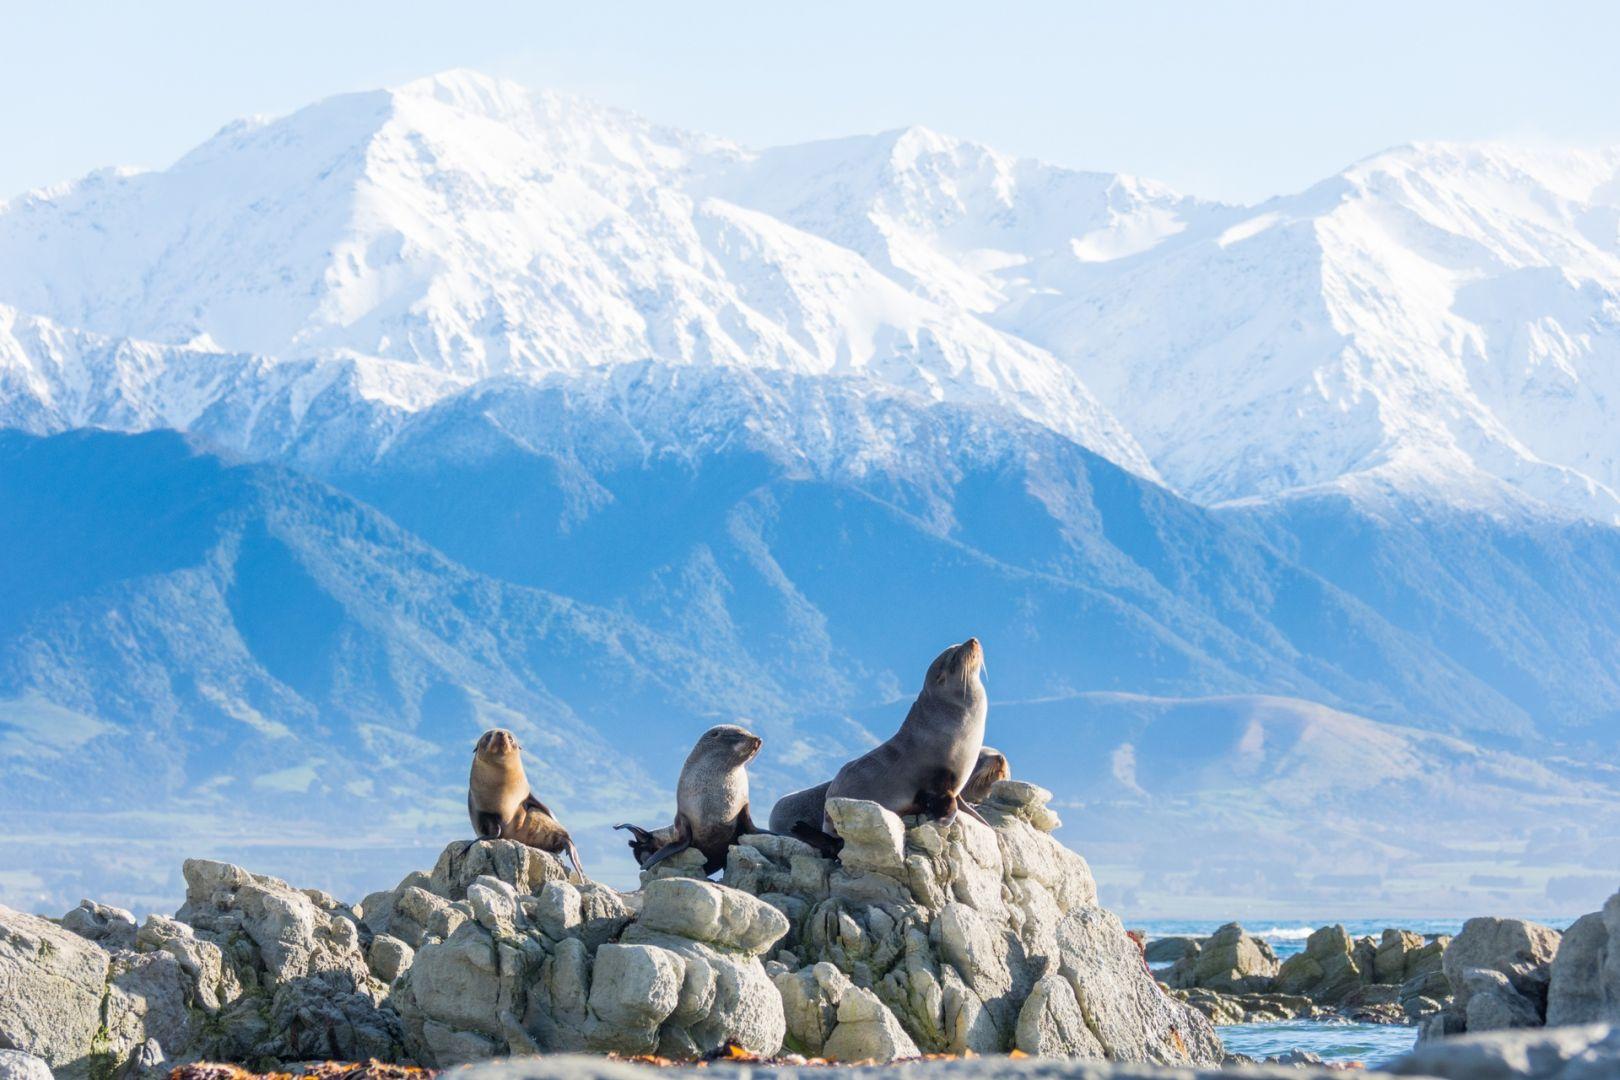 Seals sitting on rocks with snow covered mountains in the background